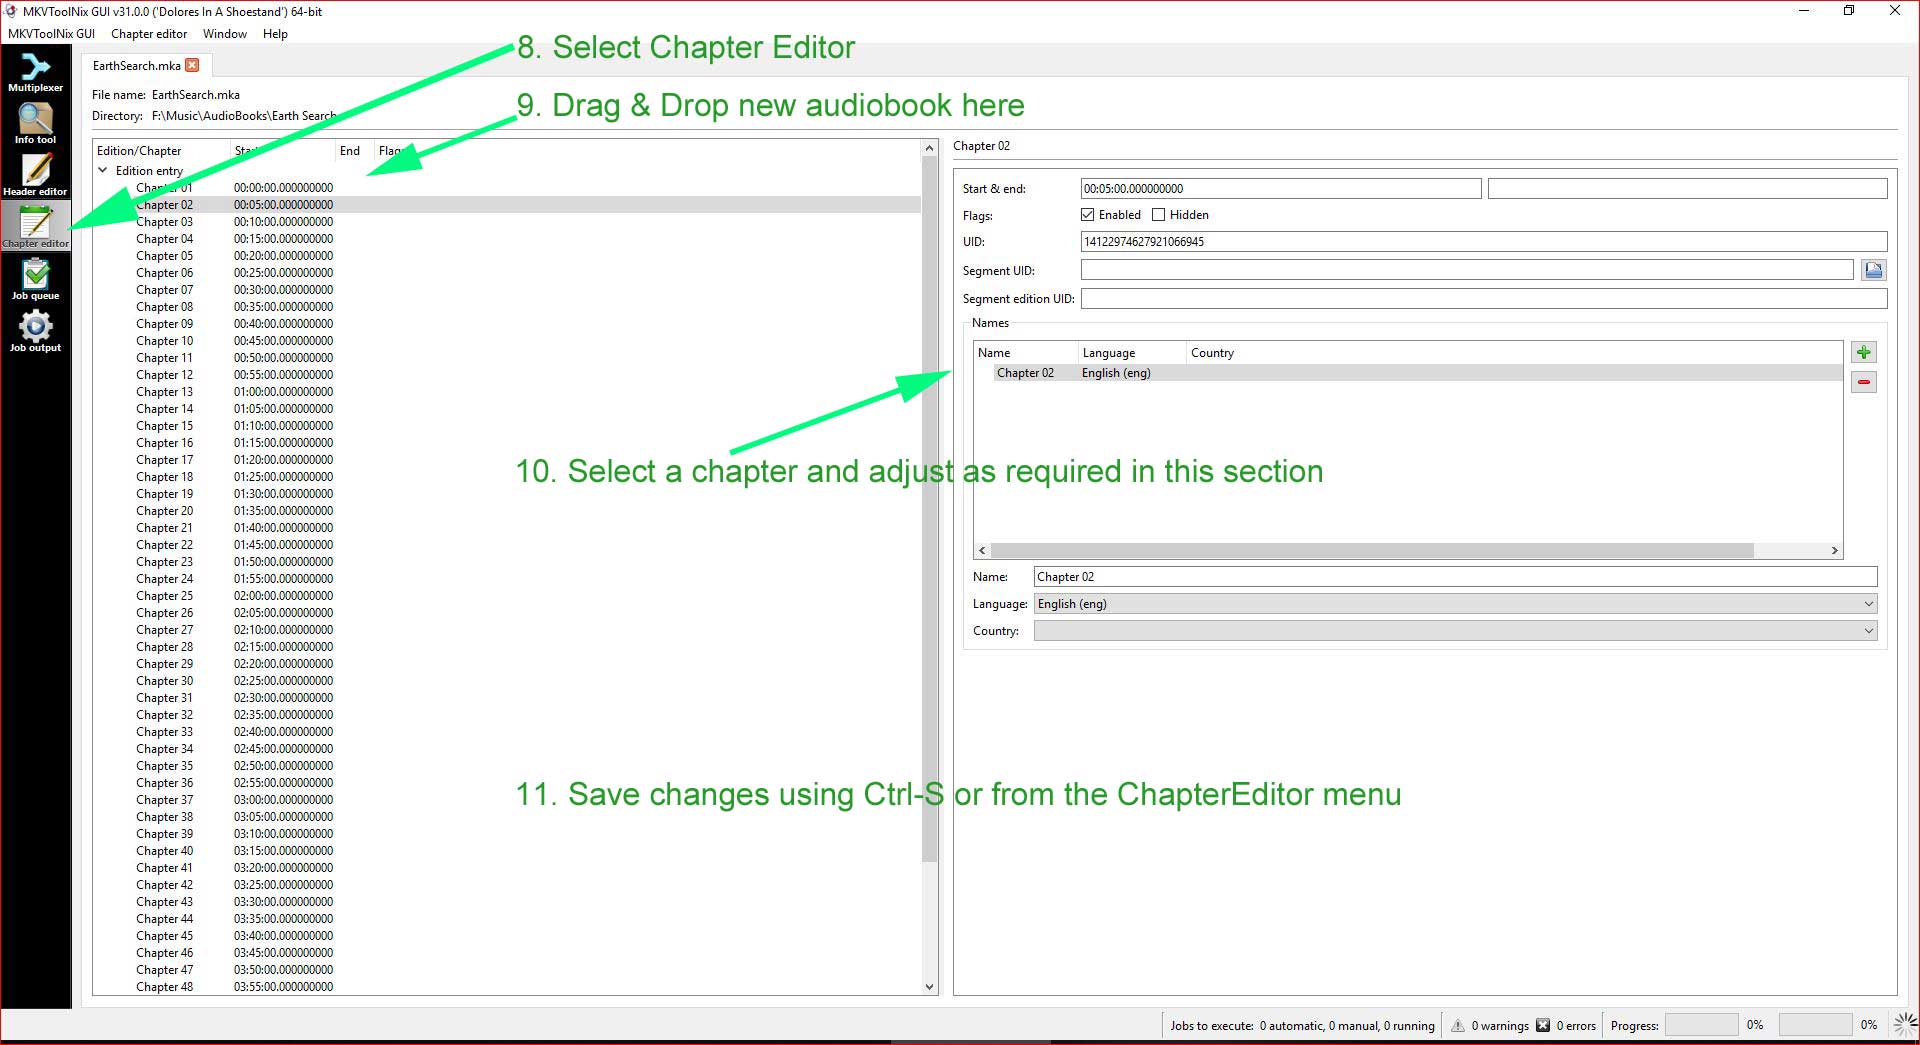 Image 3- Modifying chapters if required